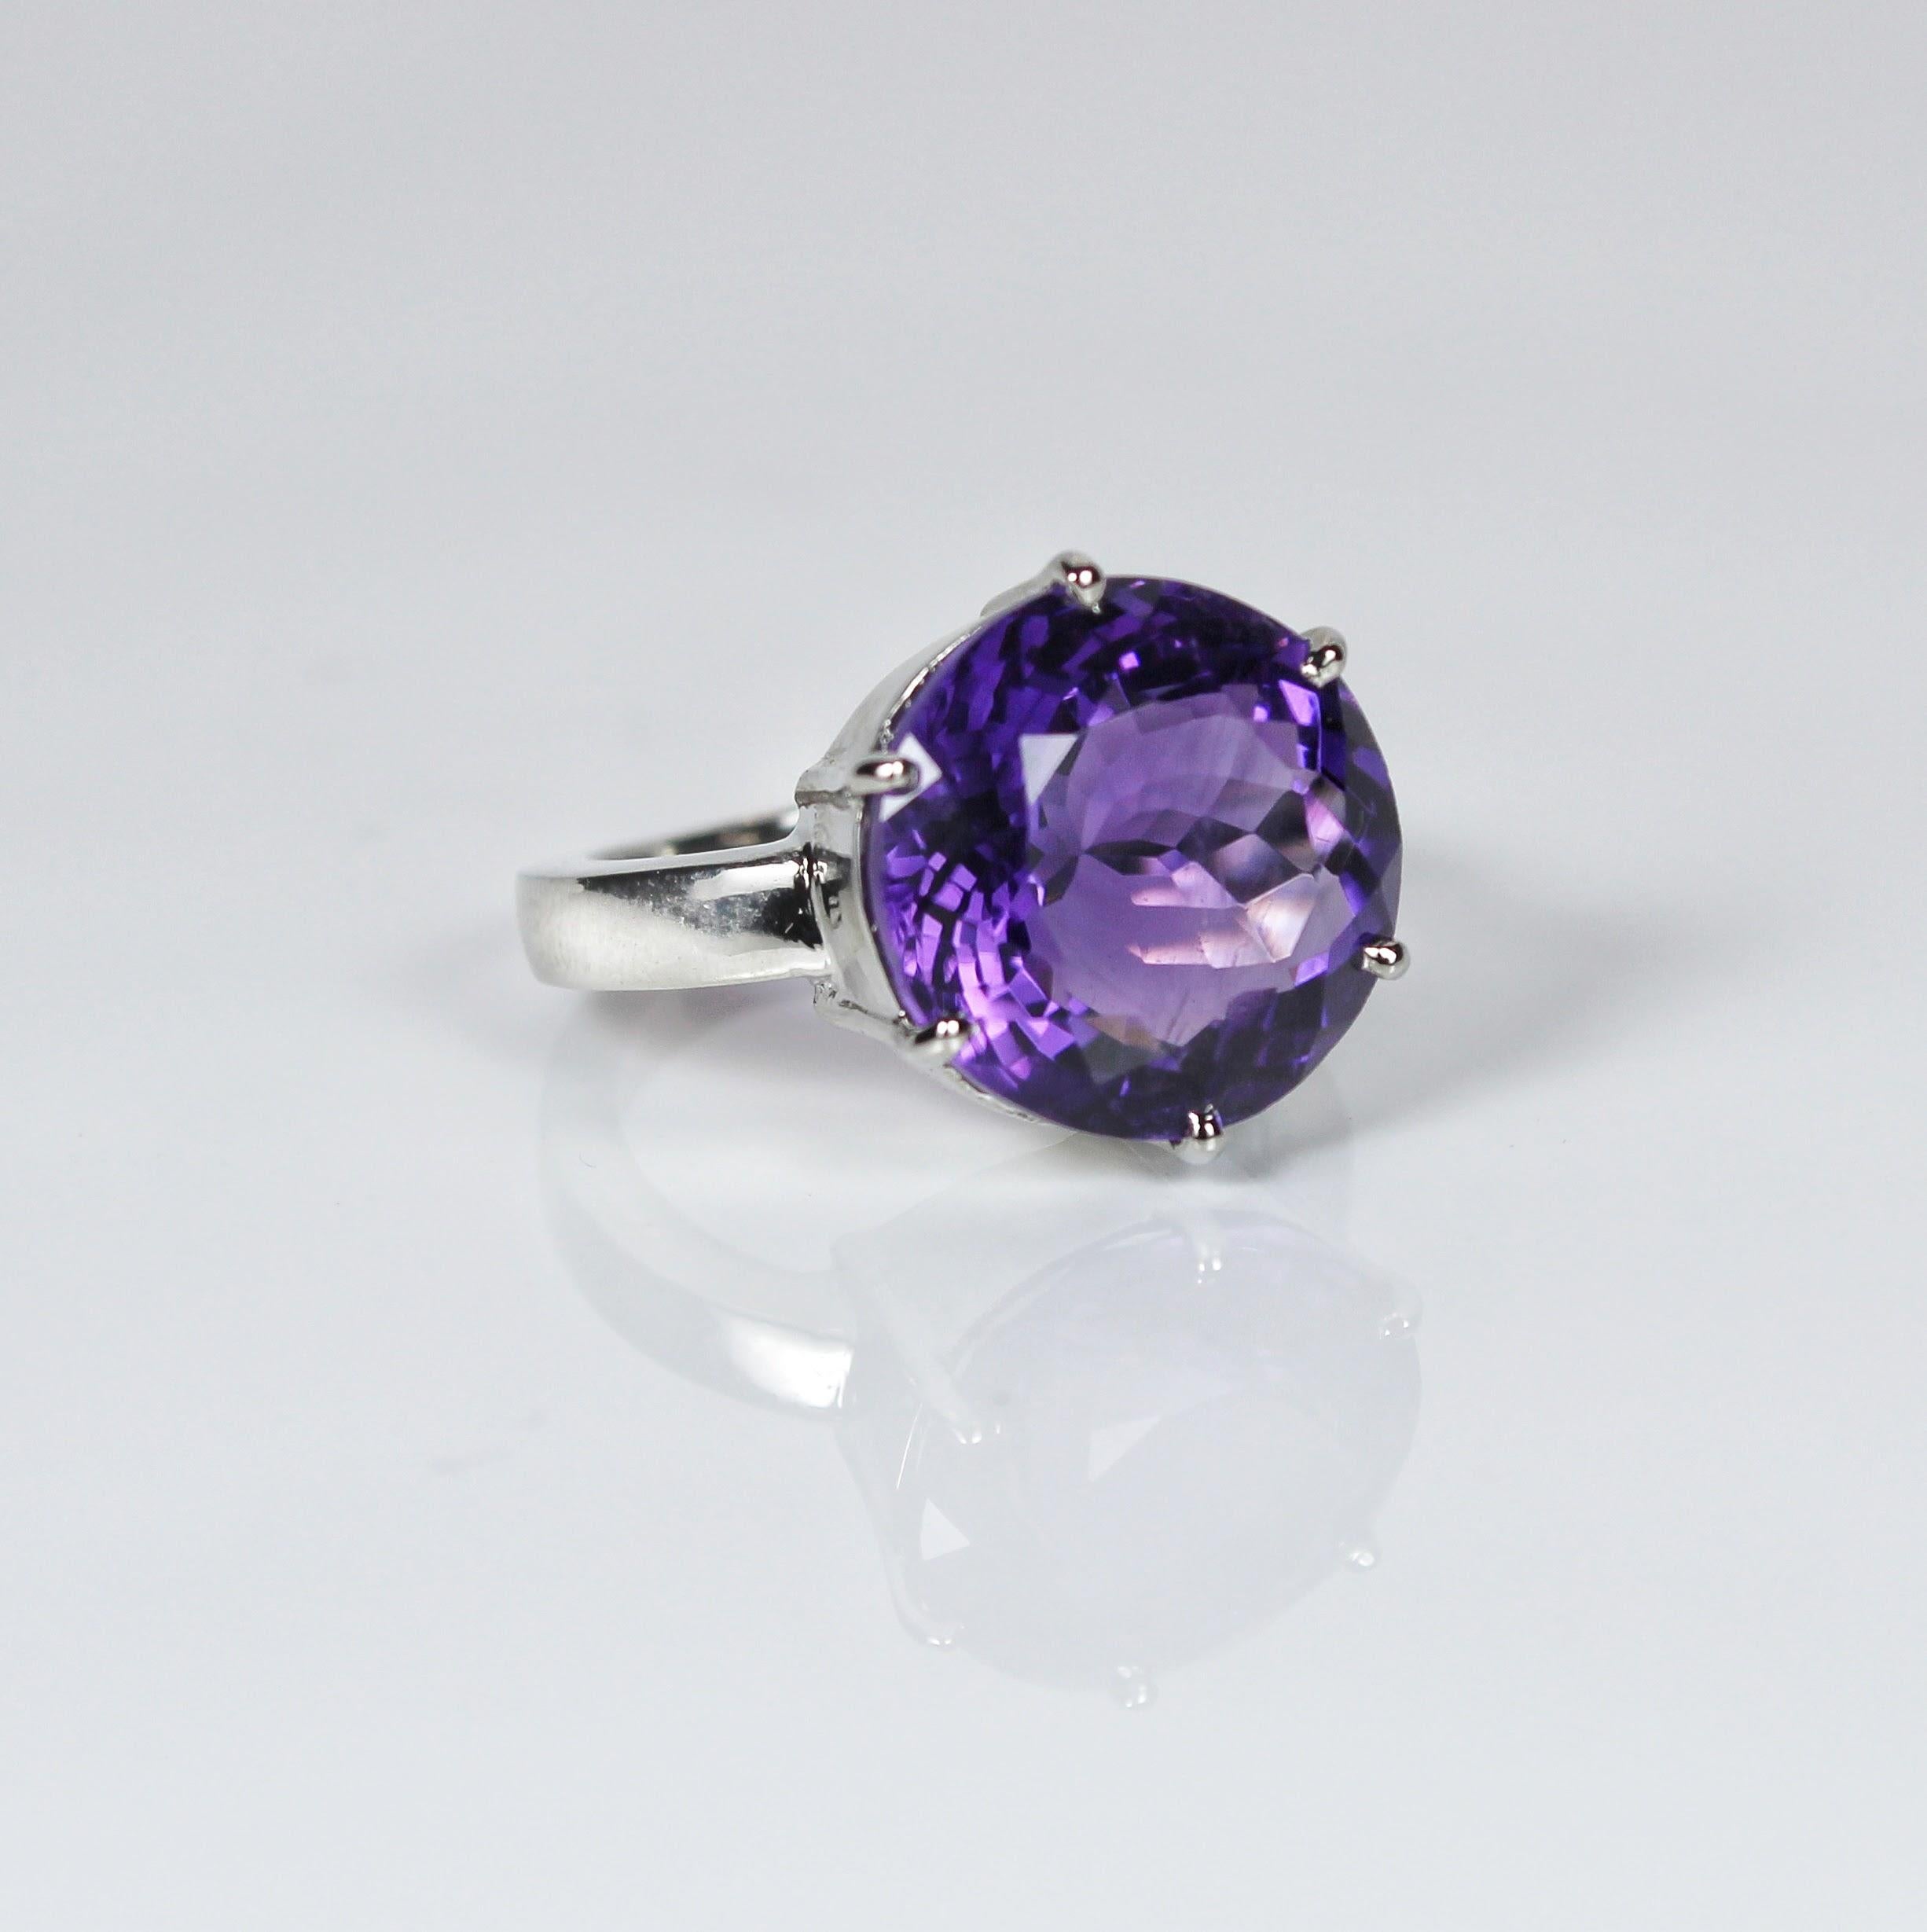 Product Details:

Metal - Silver
Indian ring size - 12
Product gross Weight - 4.350 Grams
Gemstone - Natural amethyst
Stone weight - 6.05 Carat
Stone shape - Round
Stone size - 13 x 13 mm

Beautifully crafted with silver and swarovski diamonds, this